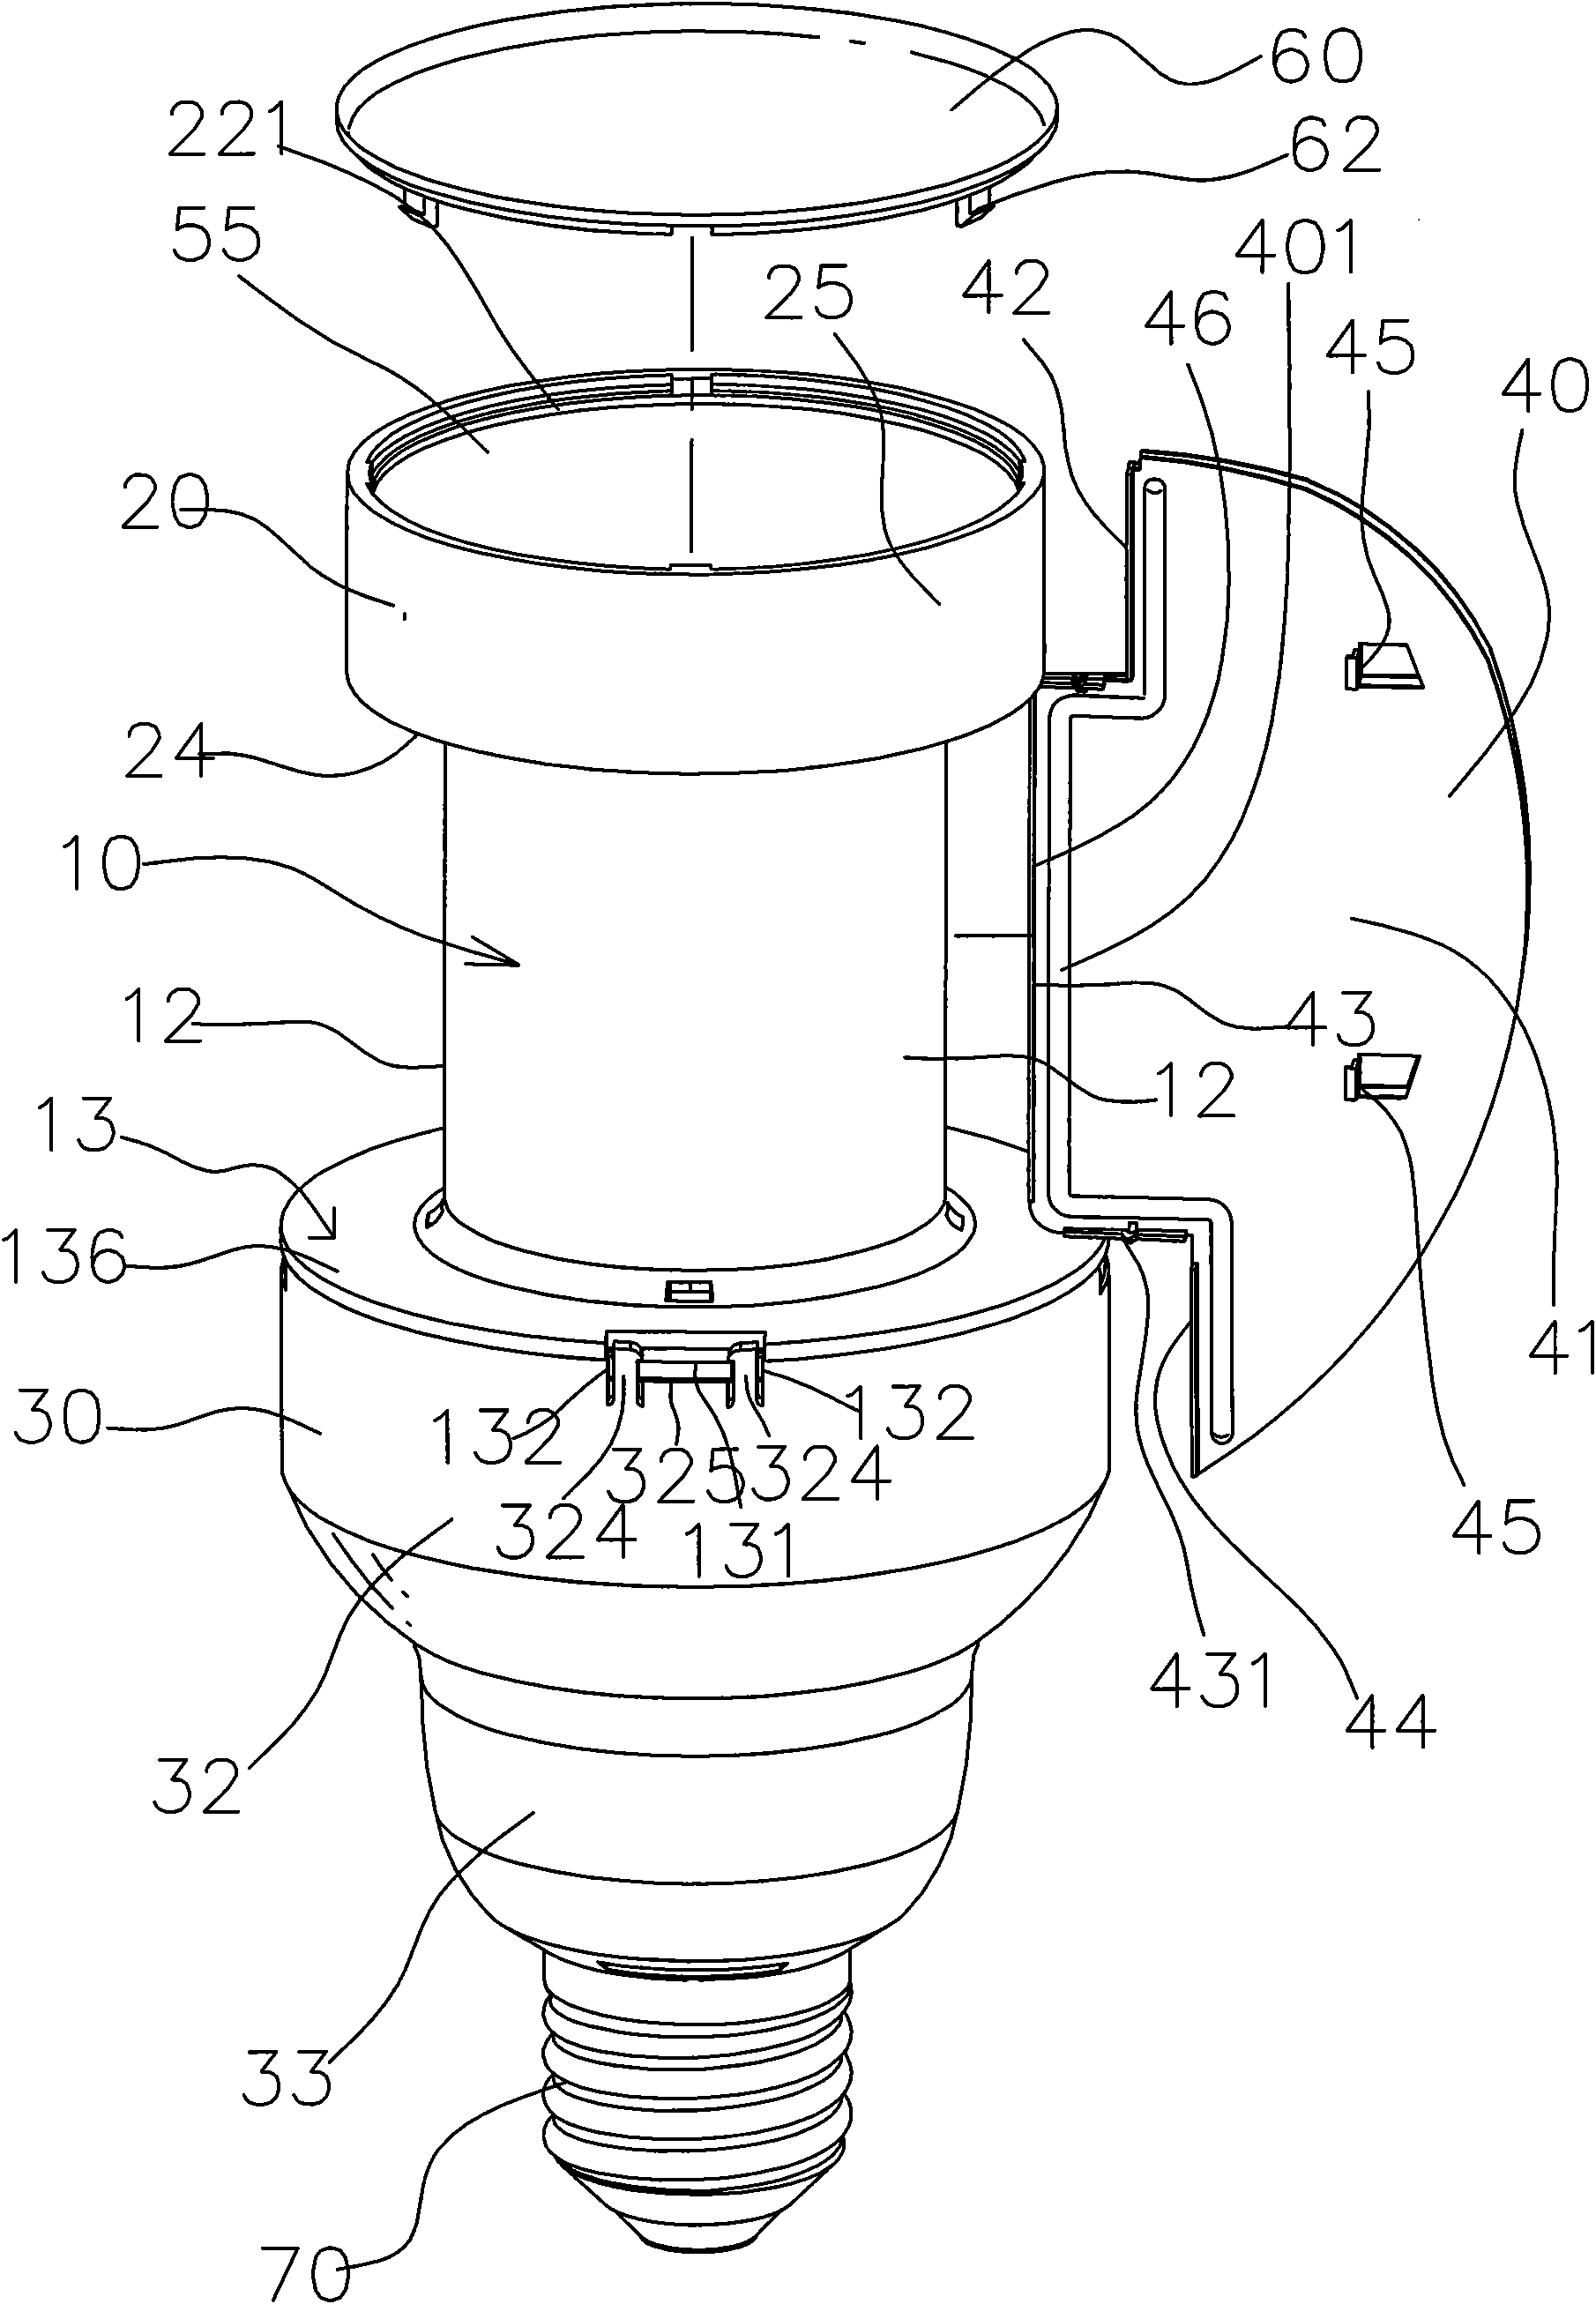 Connection device for LED lamp and radiating fins